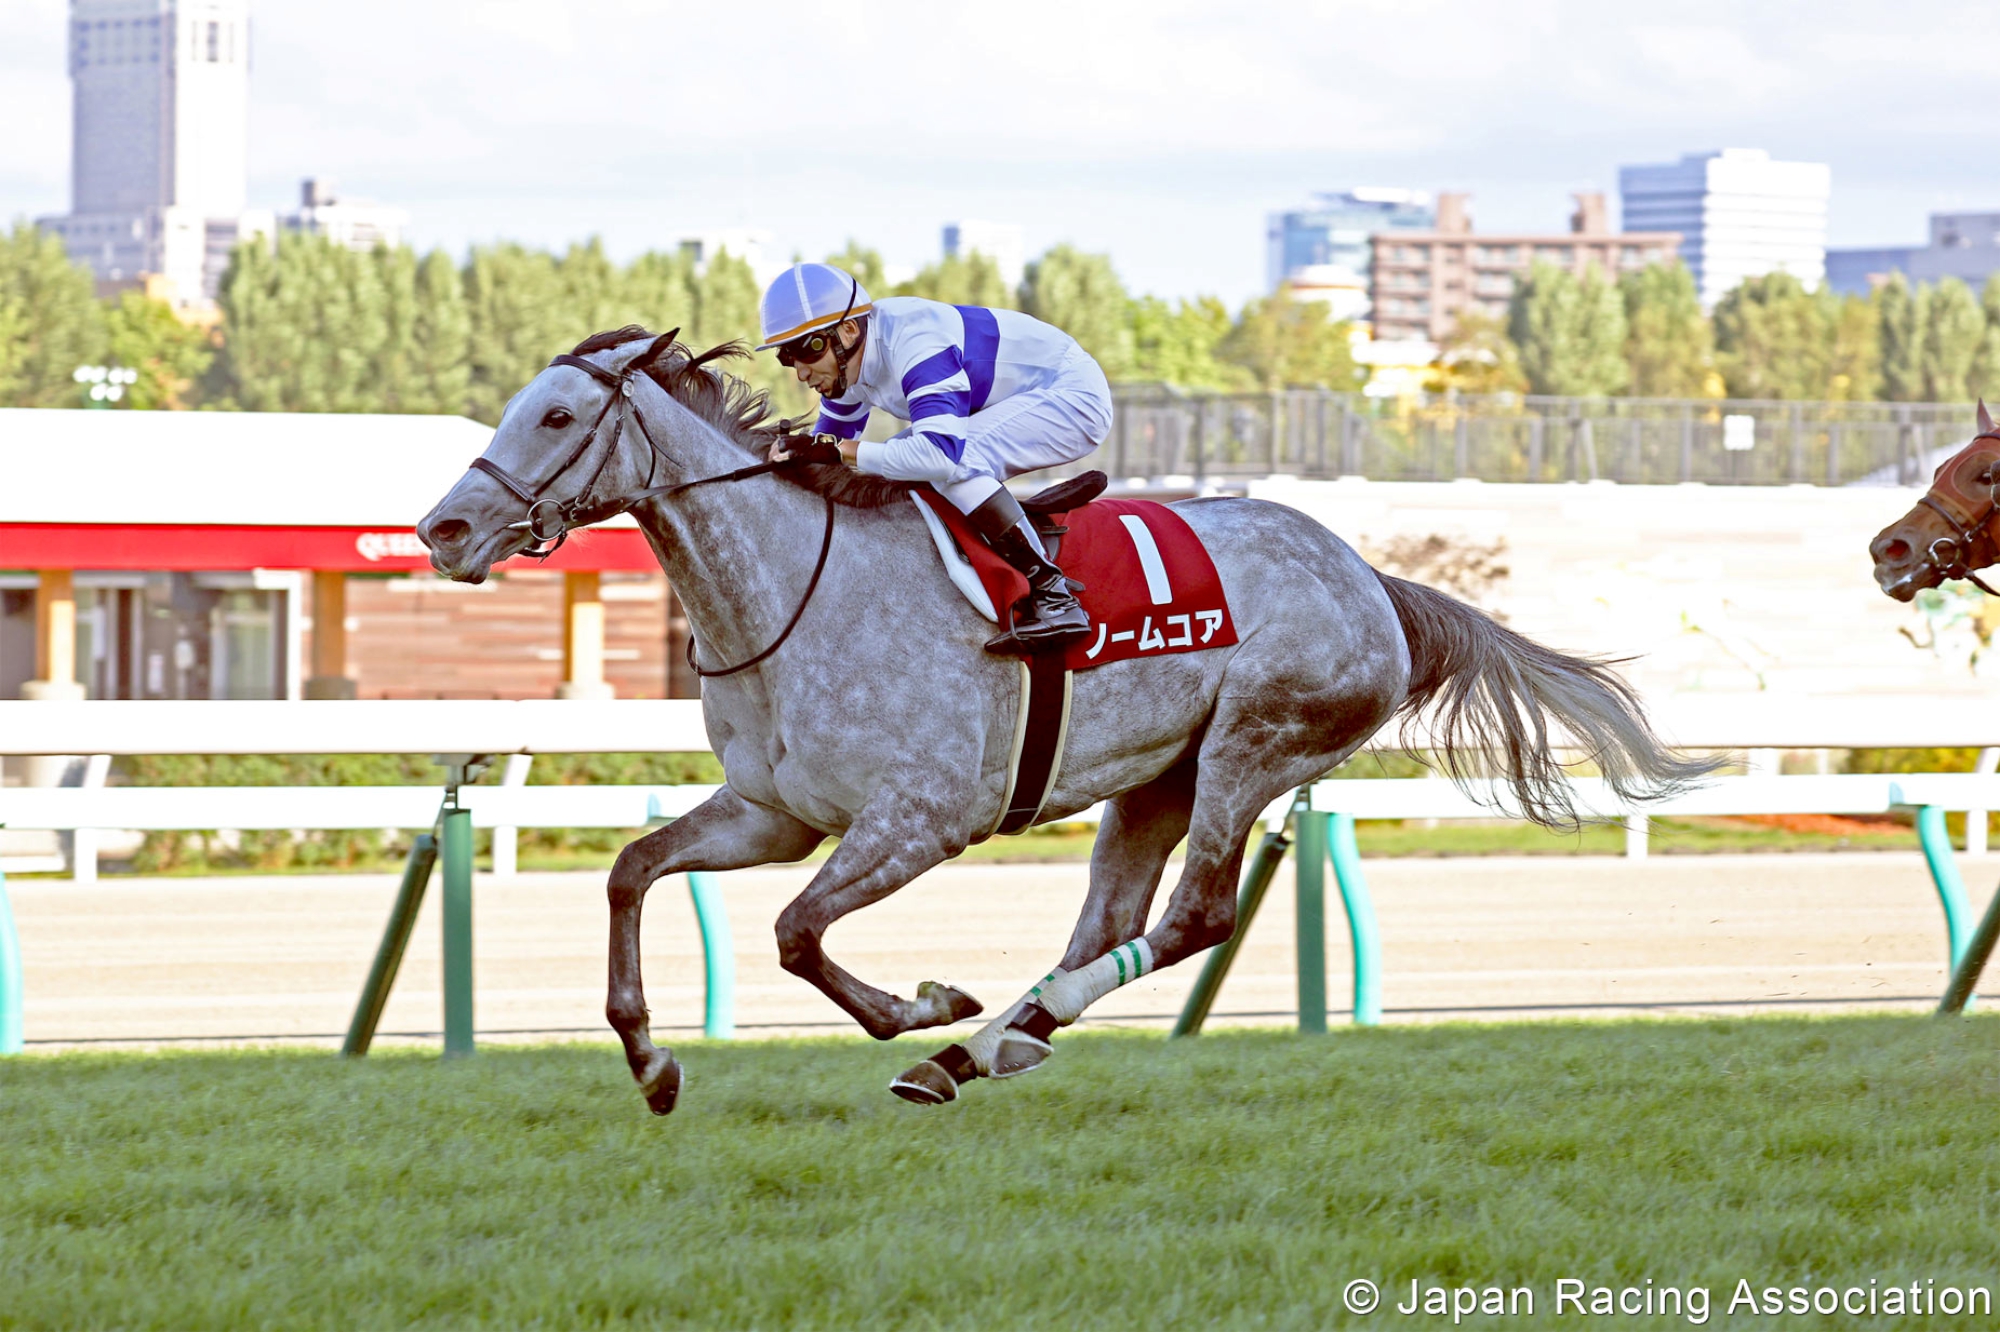 Normcore – JPN : 2019 G1 Victoria Mile winner; third to Almond Eye in that race this year; last out faded to third last in Queen Elizabeth II Cup.